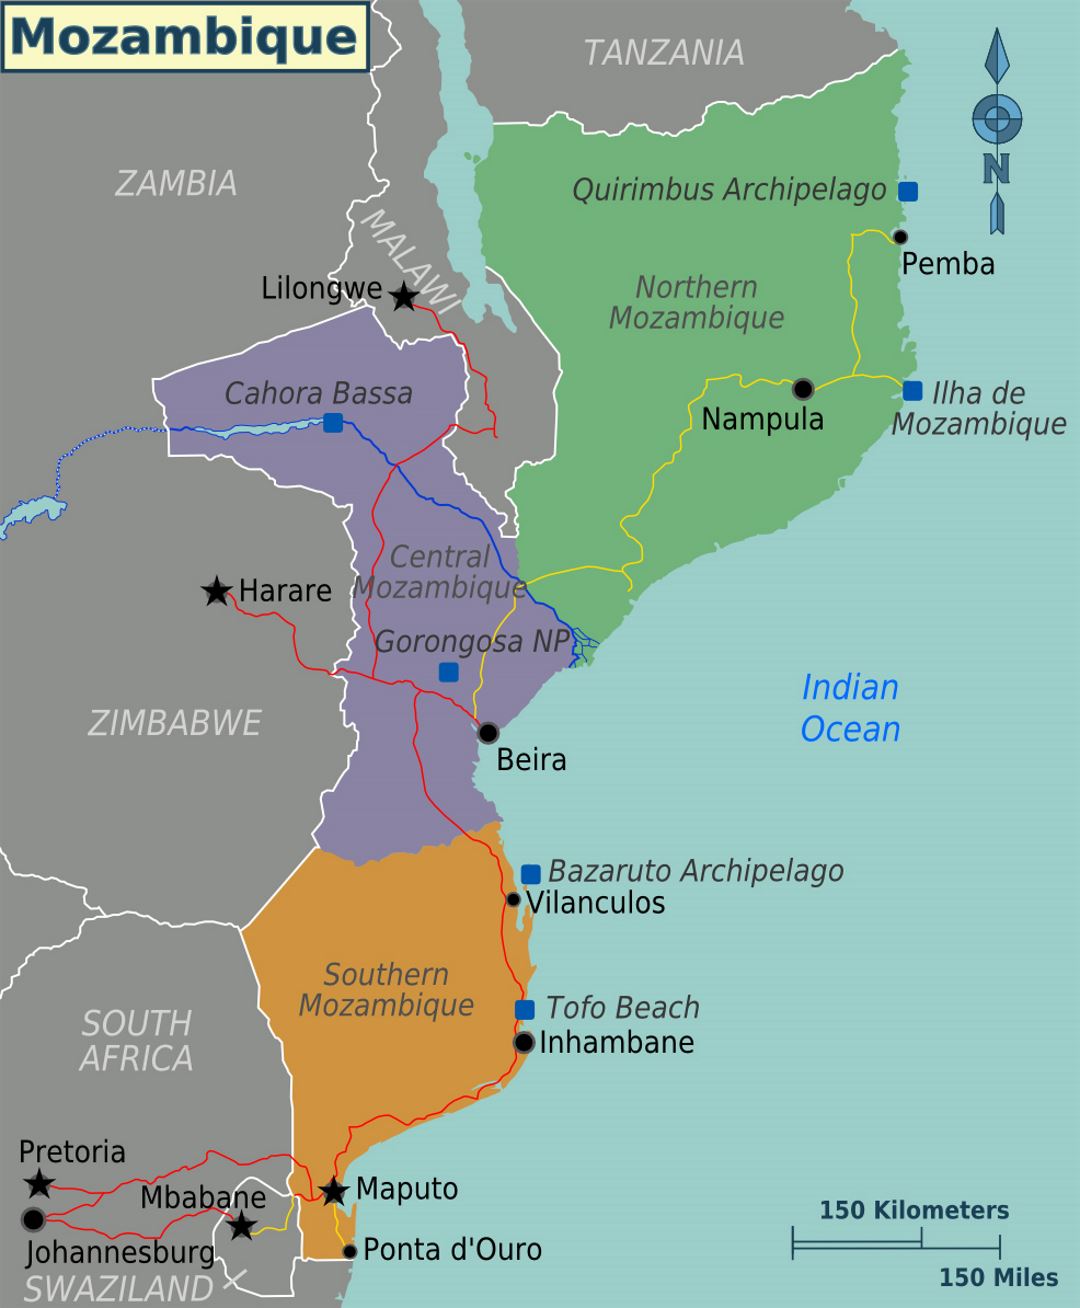 Detailed regions map of Mozambique